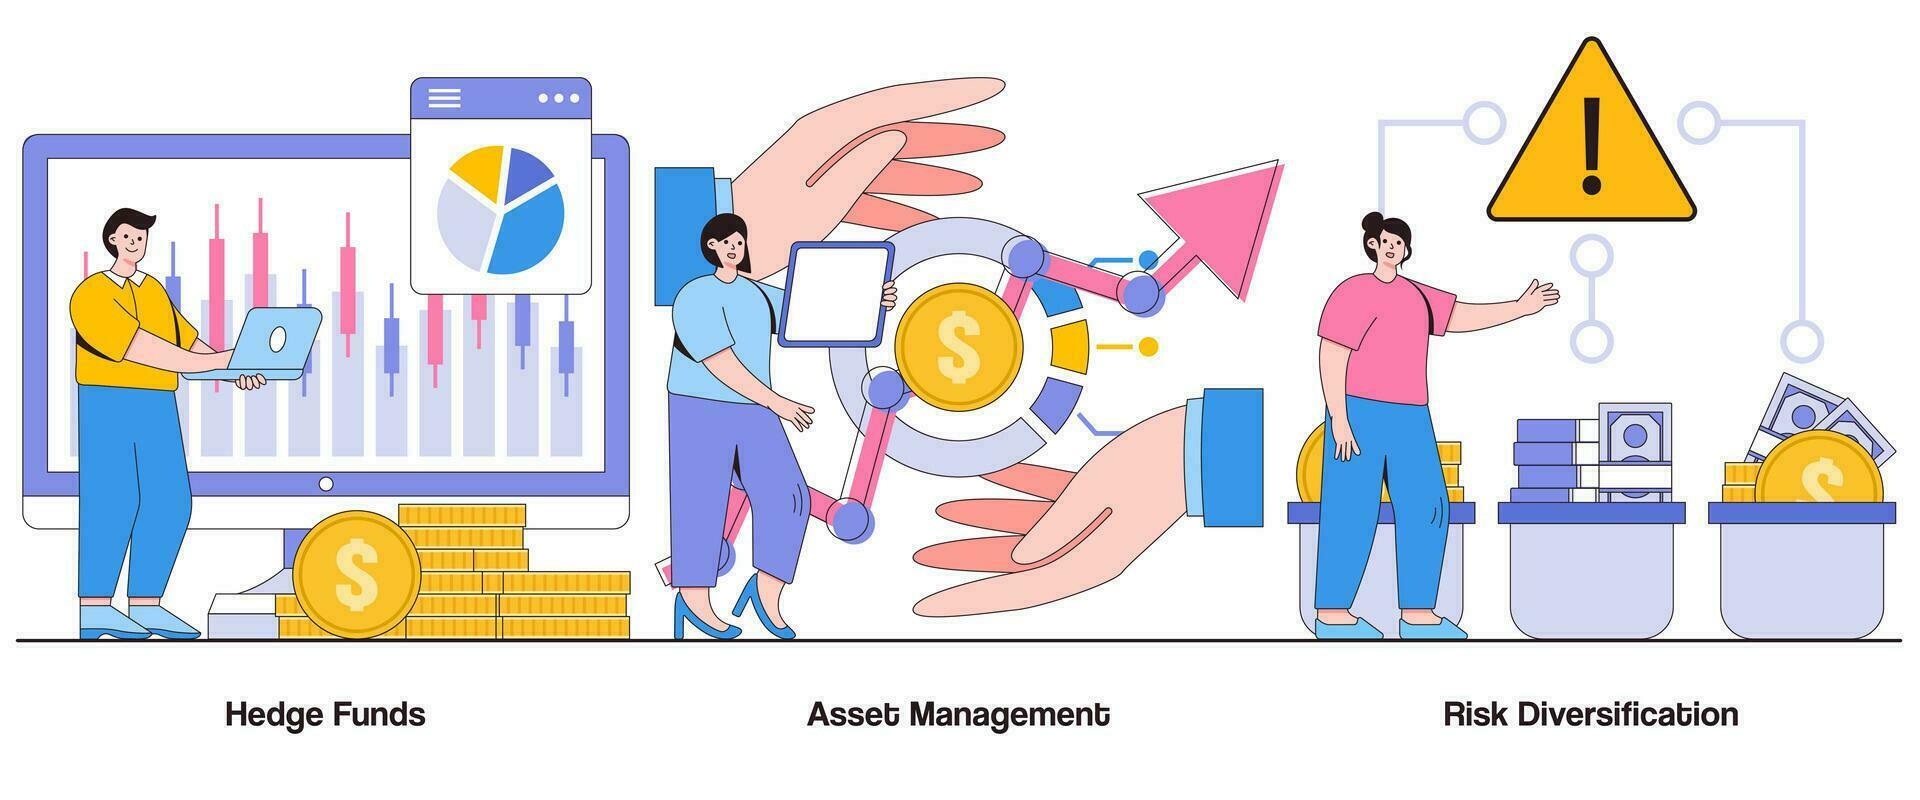 Hedge funds, asset management, risk diversification concept with character. Asset allocation abstract vector illustration set. Risk management, asset diversification, financial protection metaphor